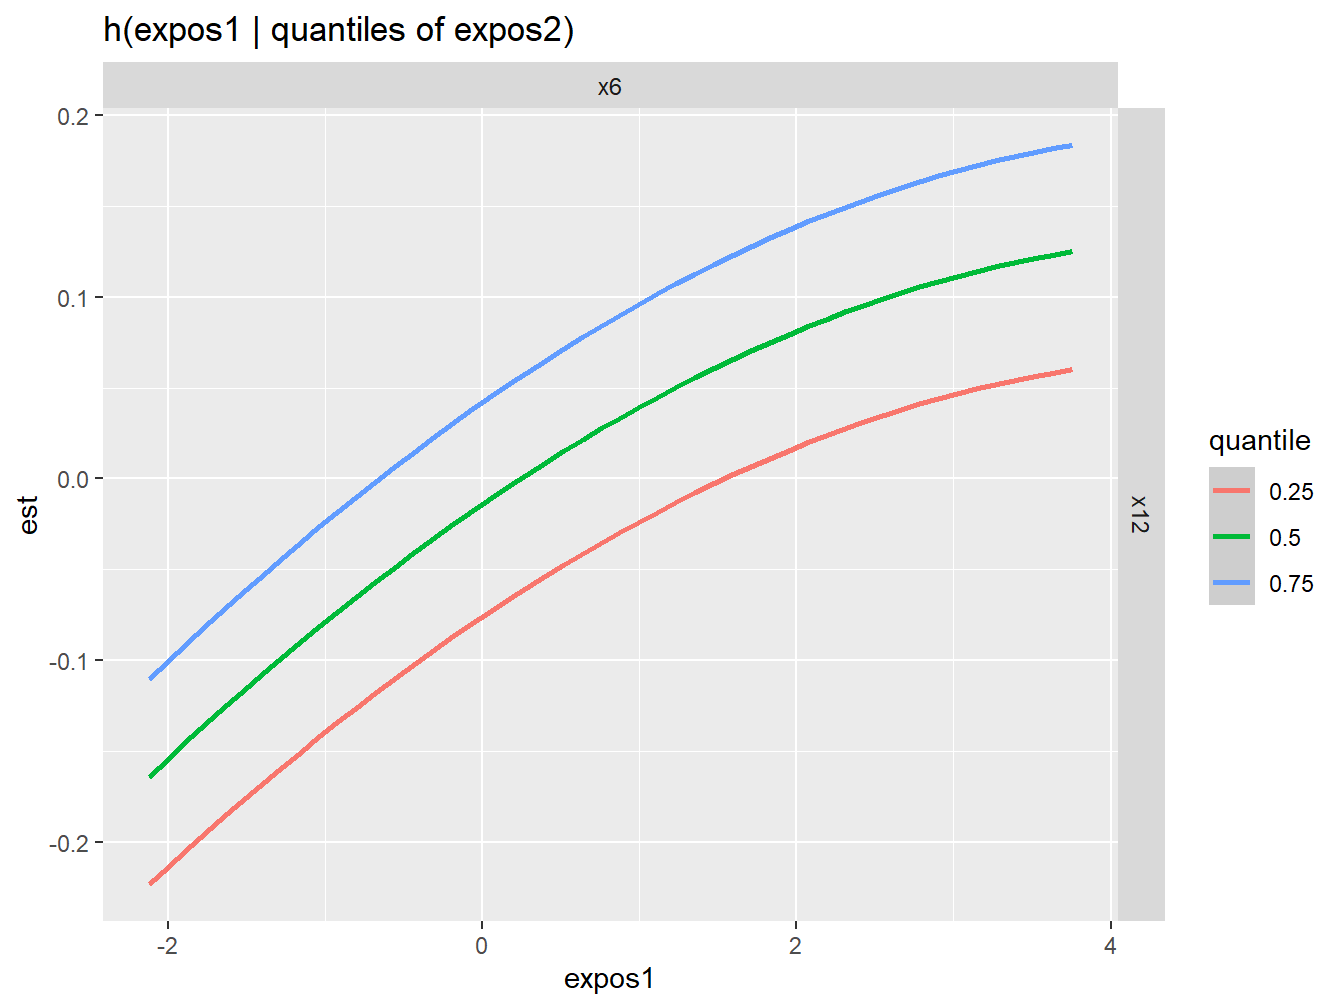 Qualitative interaction assessment between X6 and x12 from BKMR in the simulated dataset